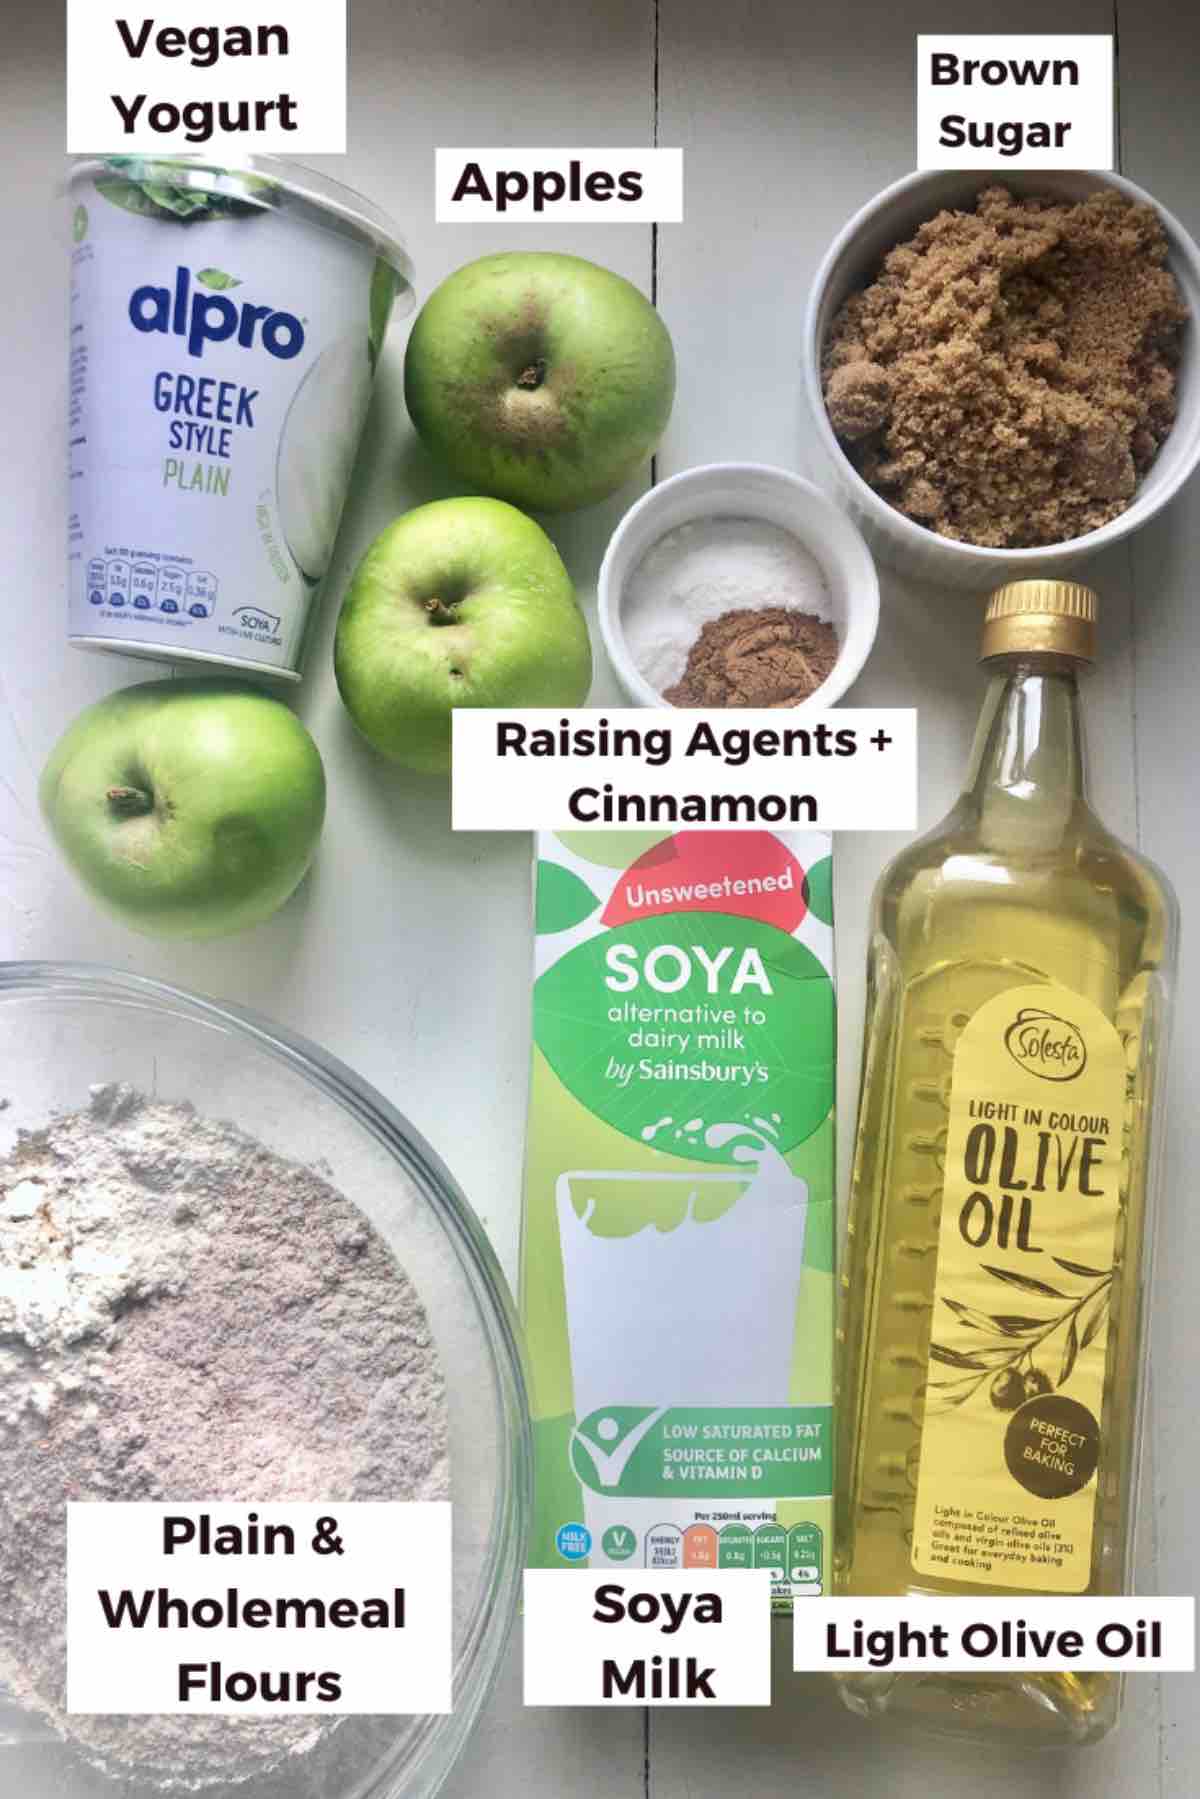 Ingredients for making apple and cinnamon muffins.